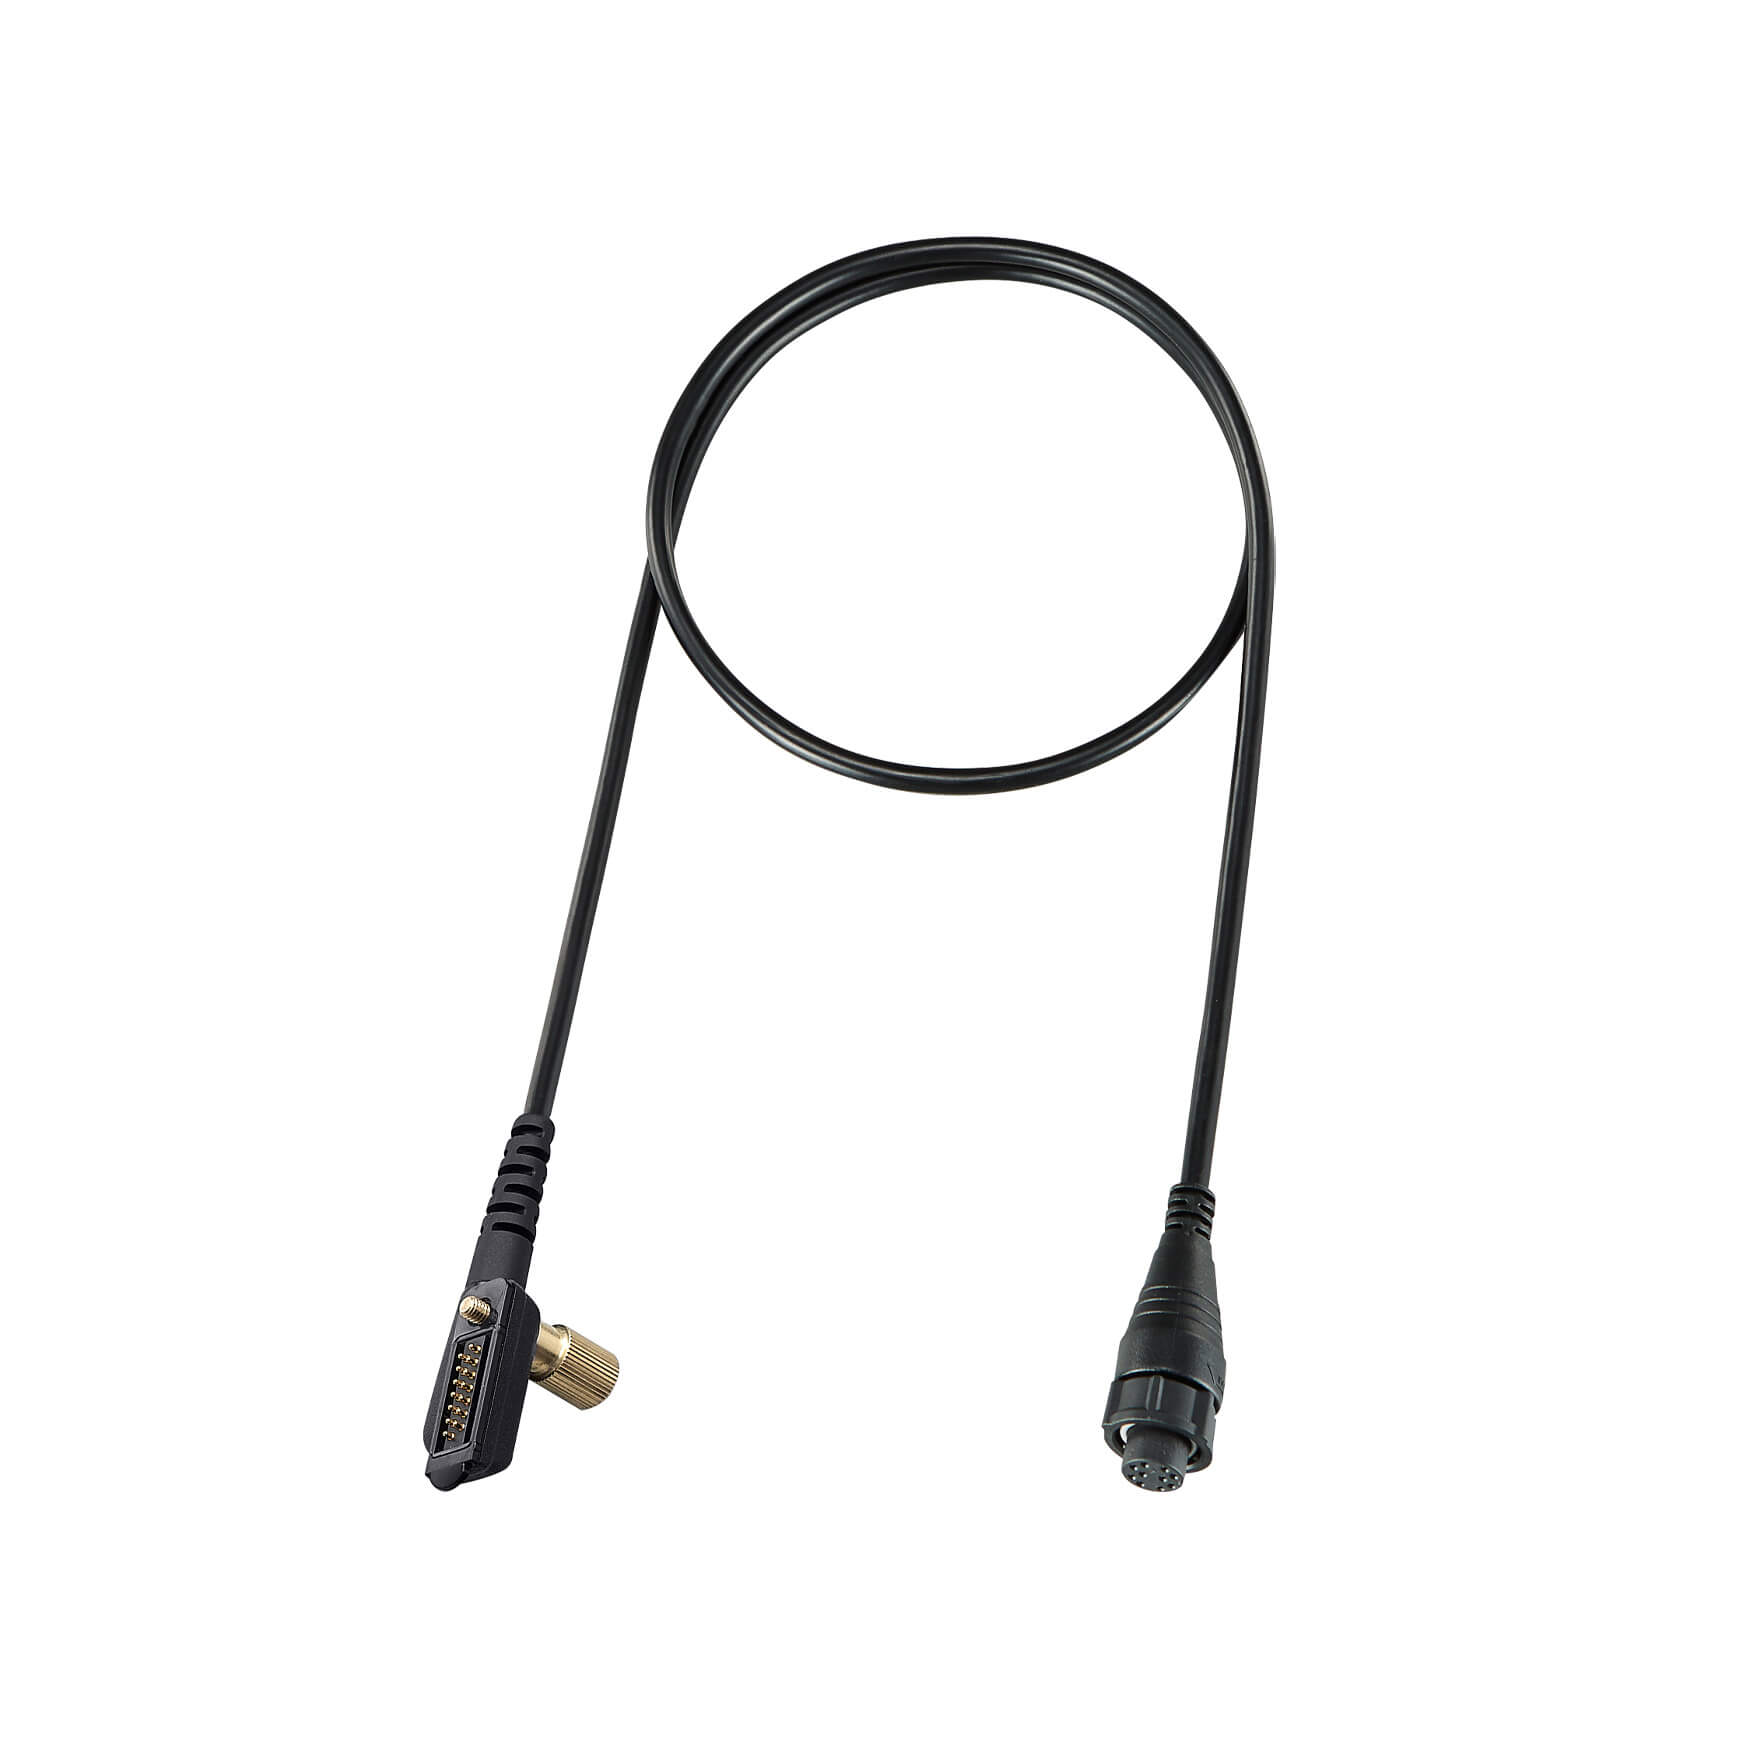 ICOM-OPC-2362-Handheld-to-Mobile-Cable